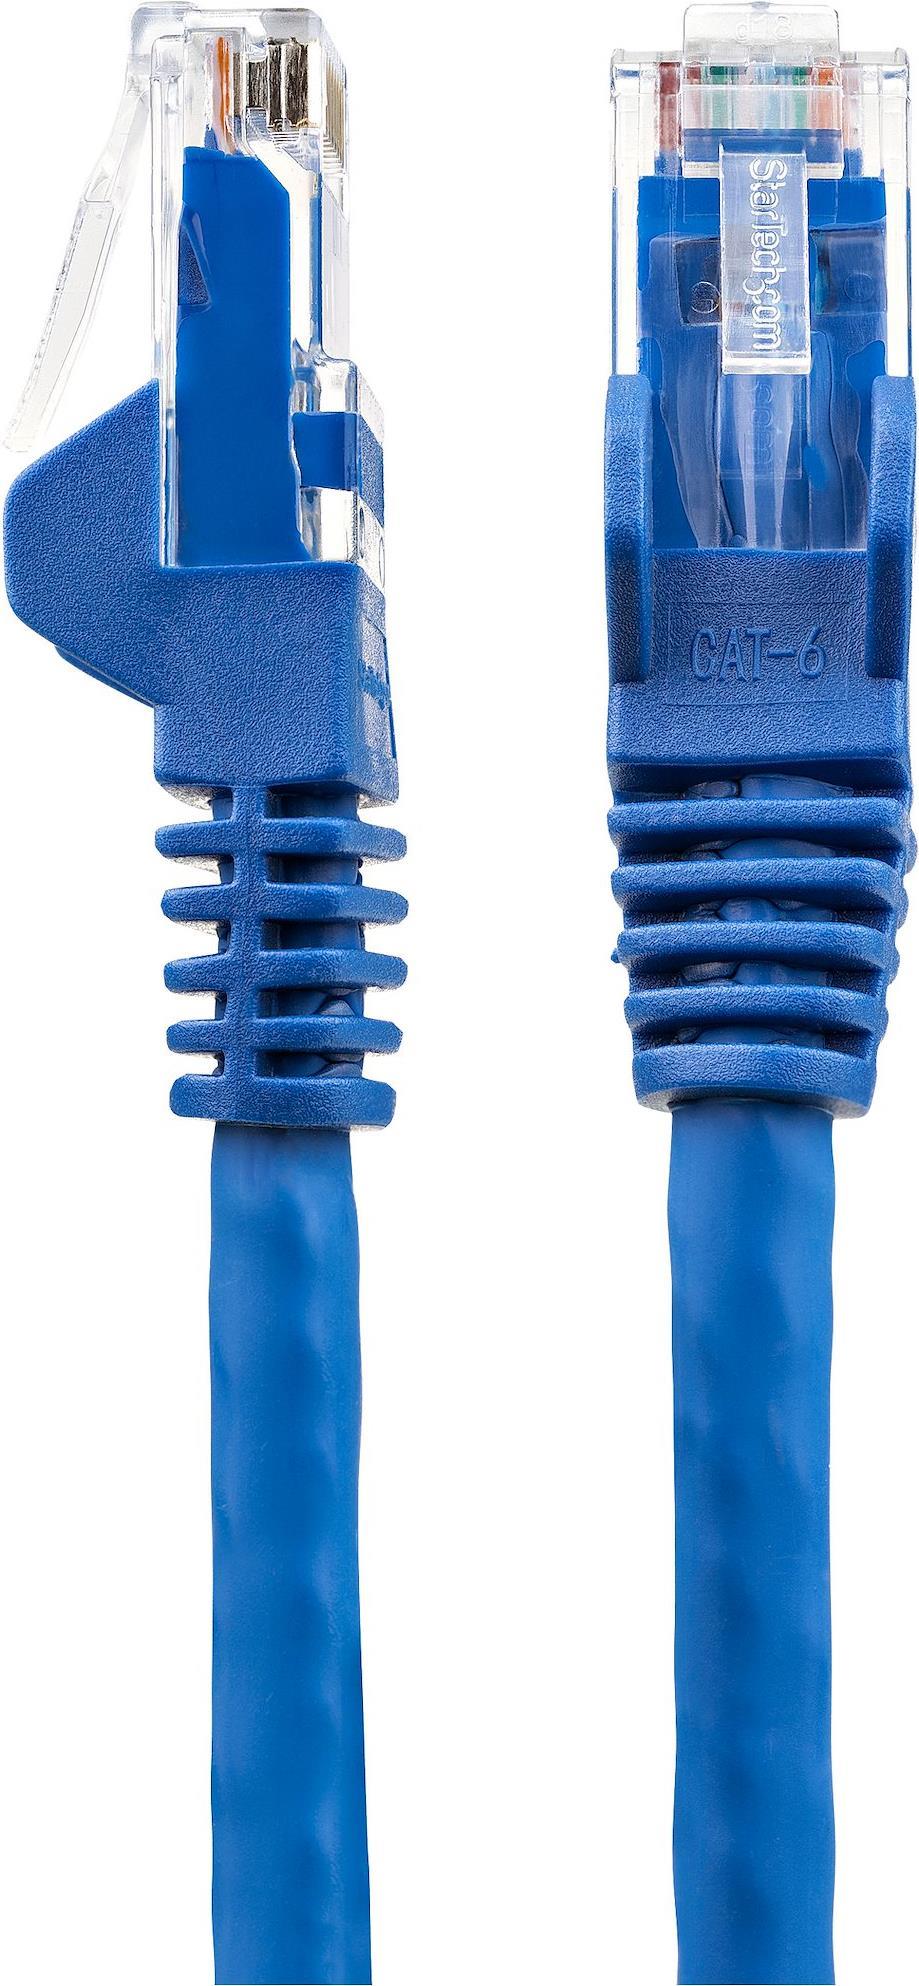 StarTech.com 7m LSZH CAT6 Ethernet Cable, 10 Gigabit Snagless RJ45 100W PoE Network Patch Cord with Strain Relief, CAT 6 10GbE UTP, Blue, Individually Tested/ETL, Low Smoke Zero Halogen (N6LPATCH7MBL)